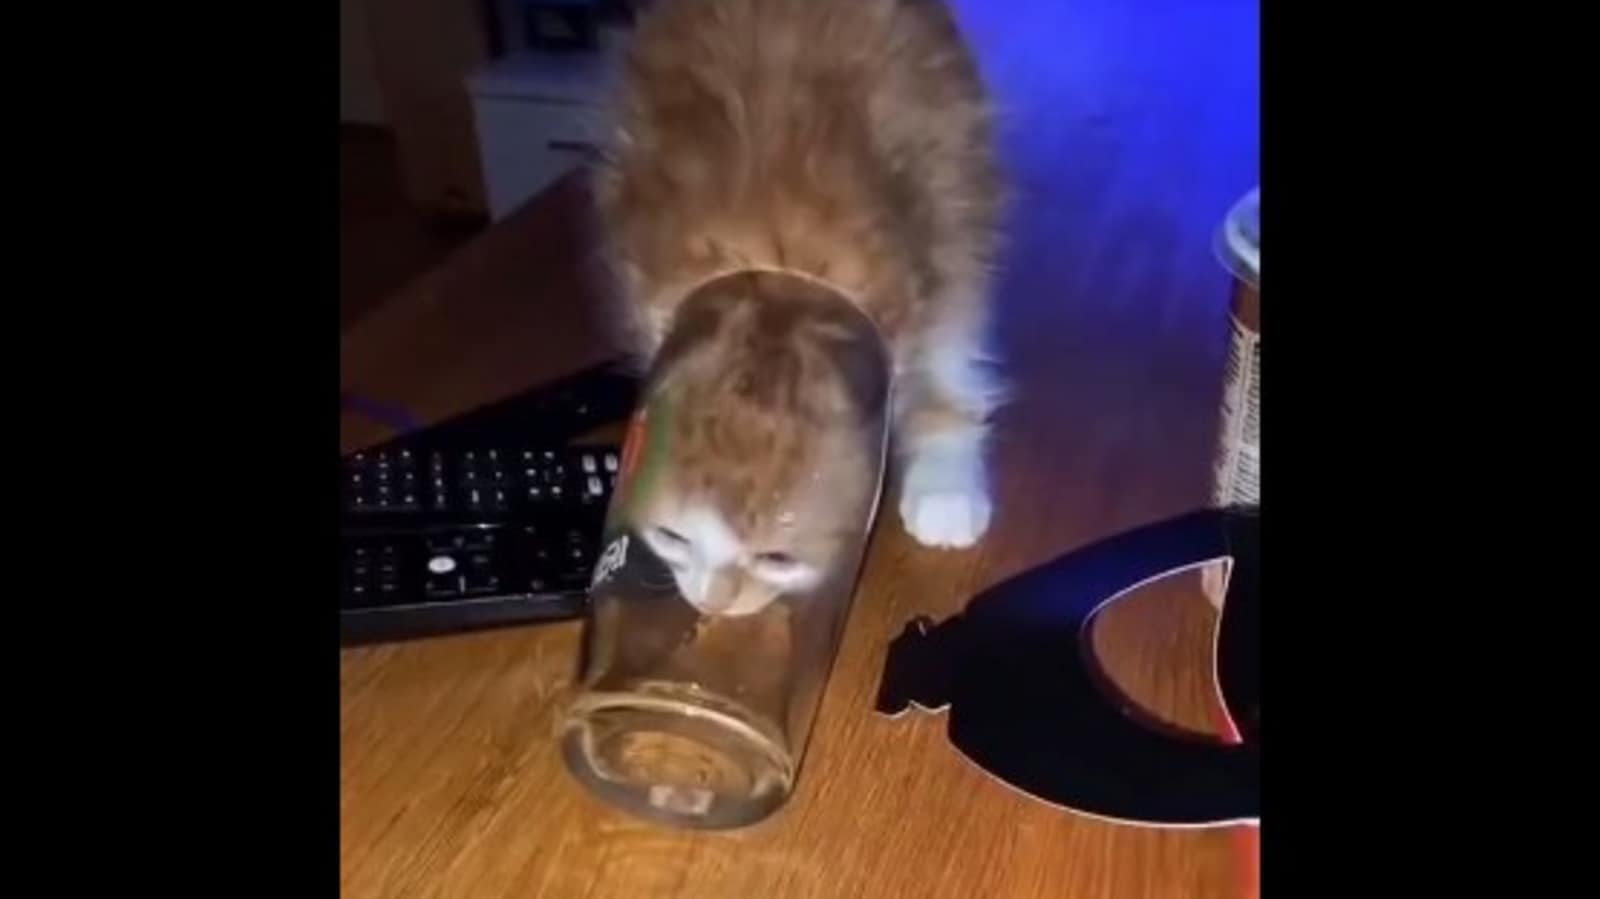 Kitty squeezing its body to lean inside a narrow glass proves ‘cats are liquid’